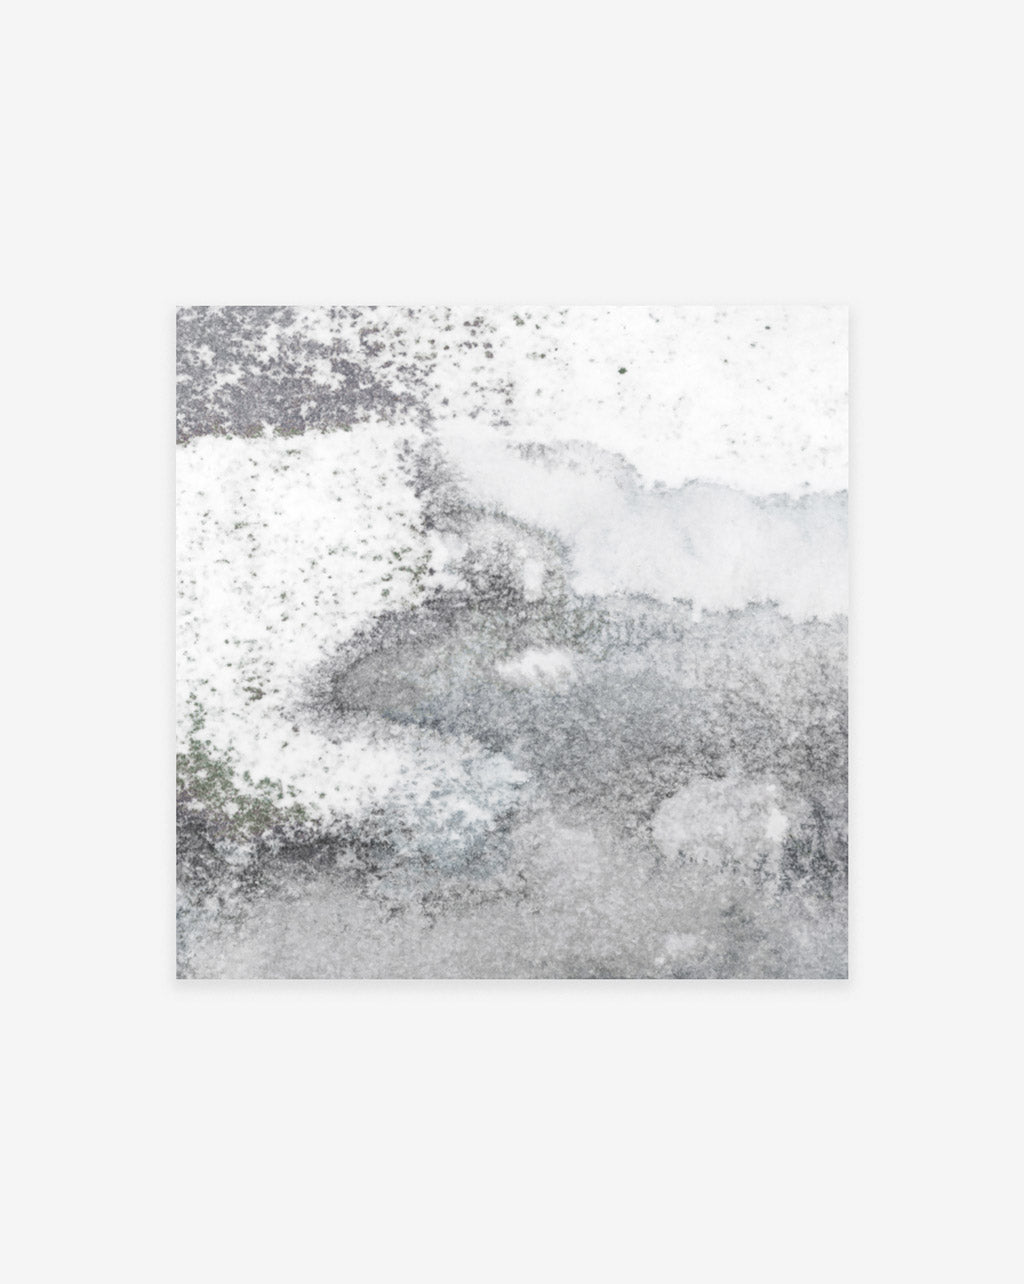 A white and gray abstract painting called the Stratum Print 27" x 27" by Eskayel, an artist